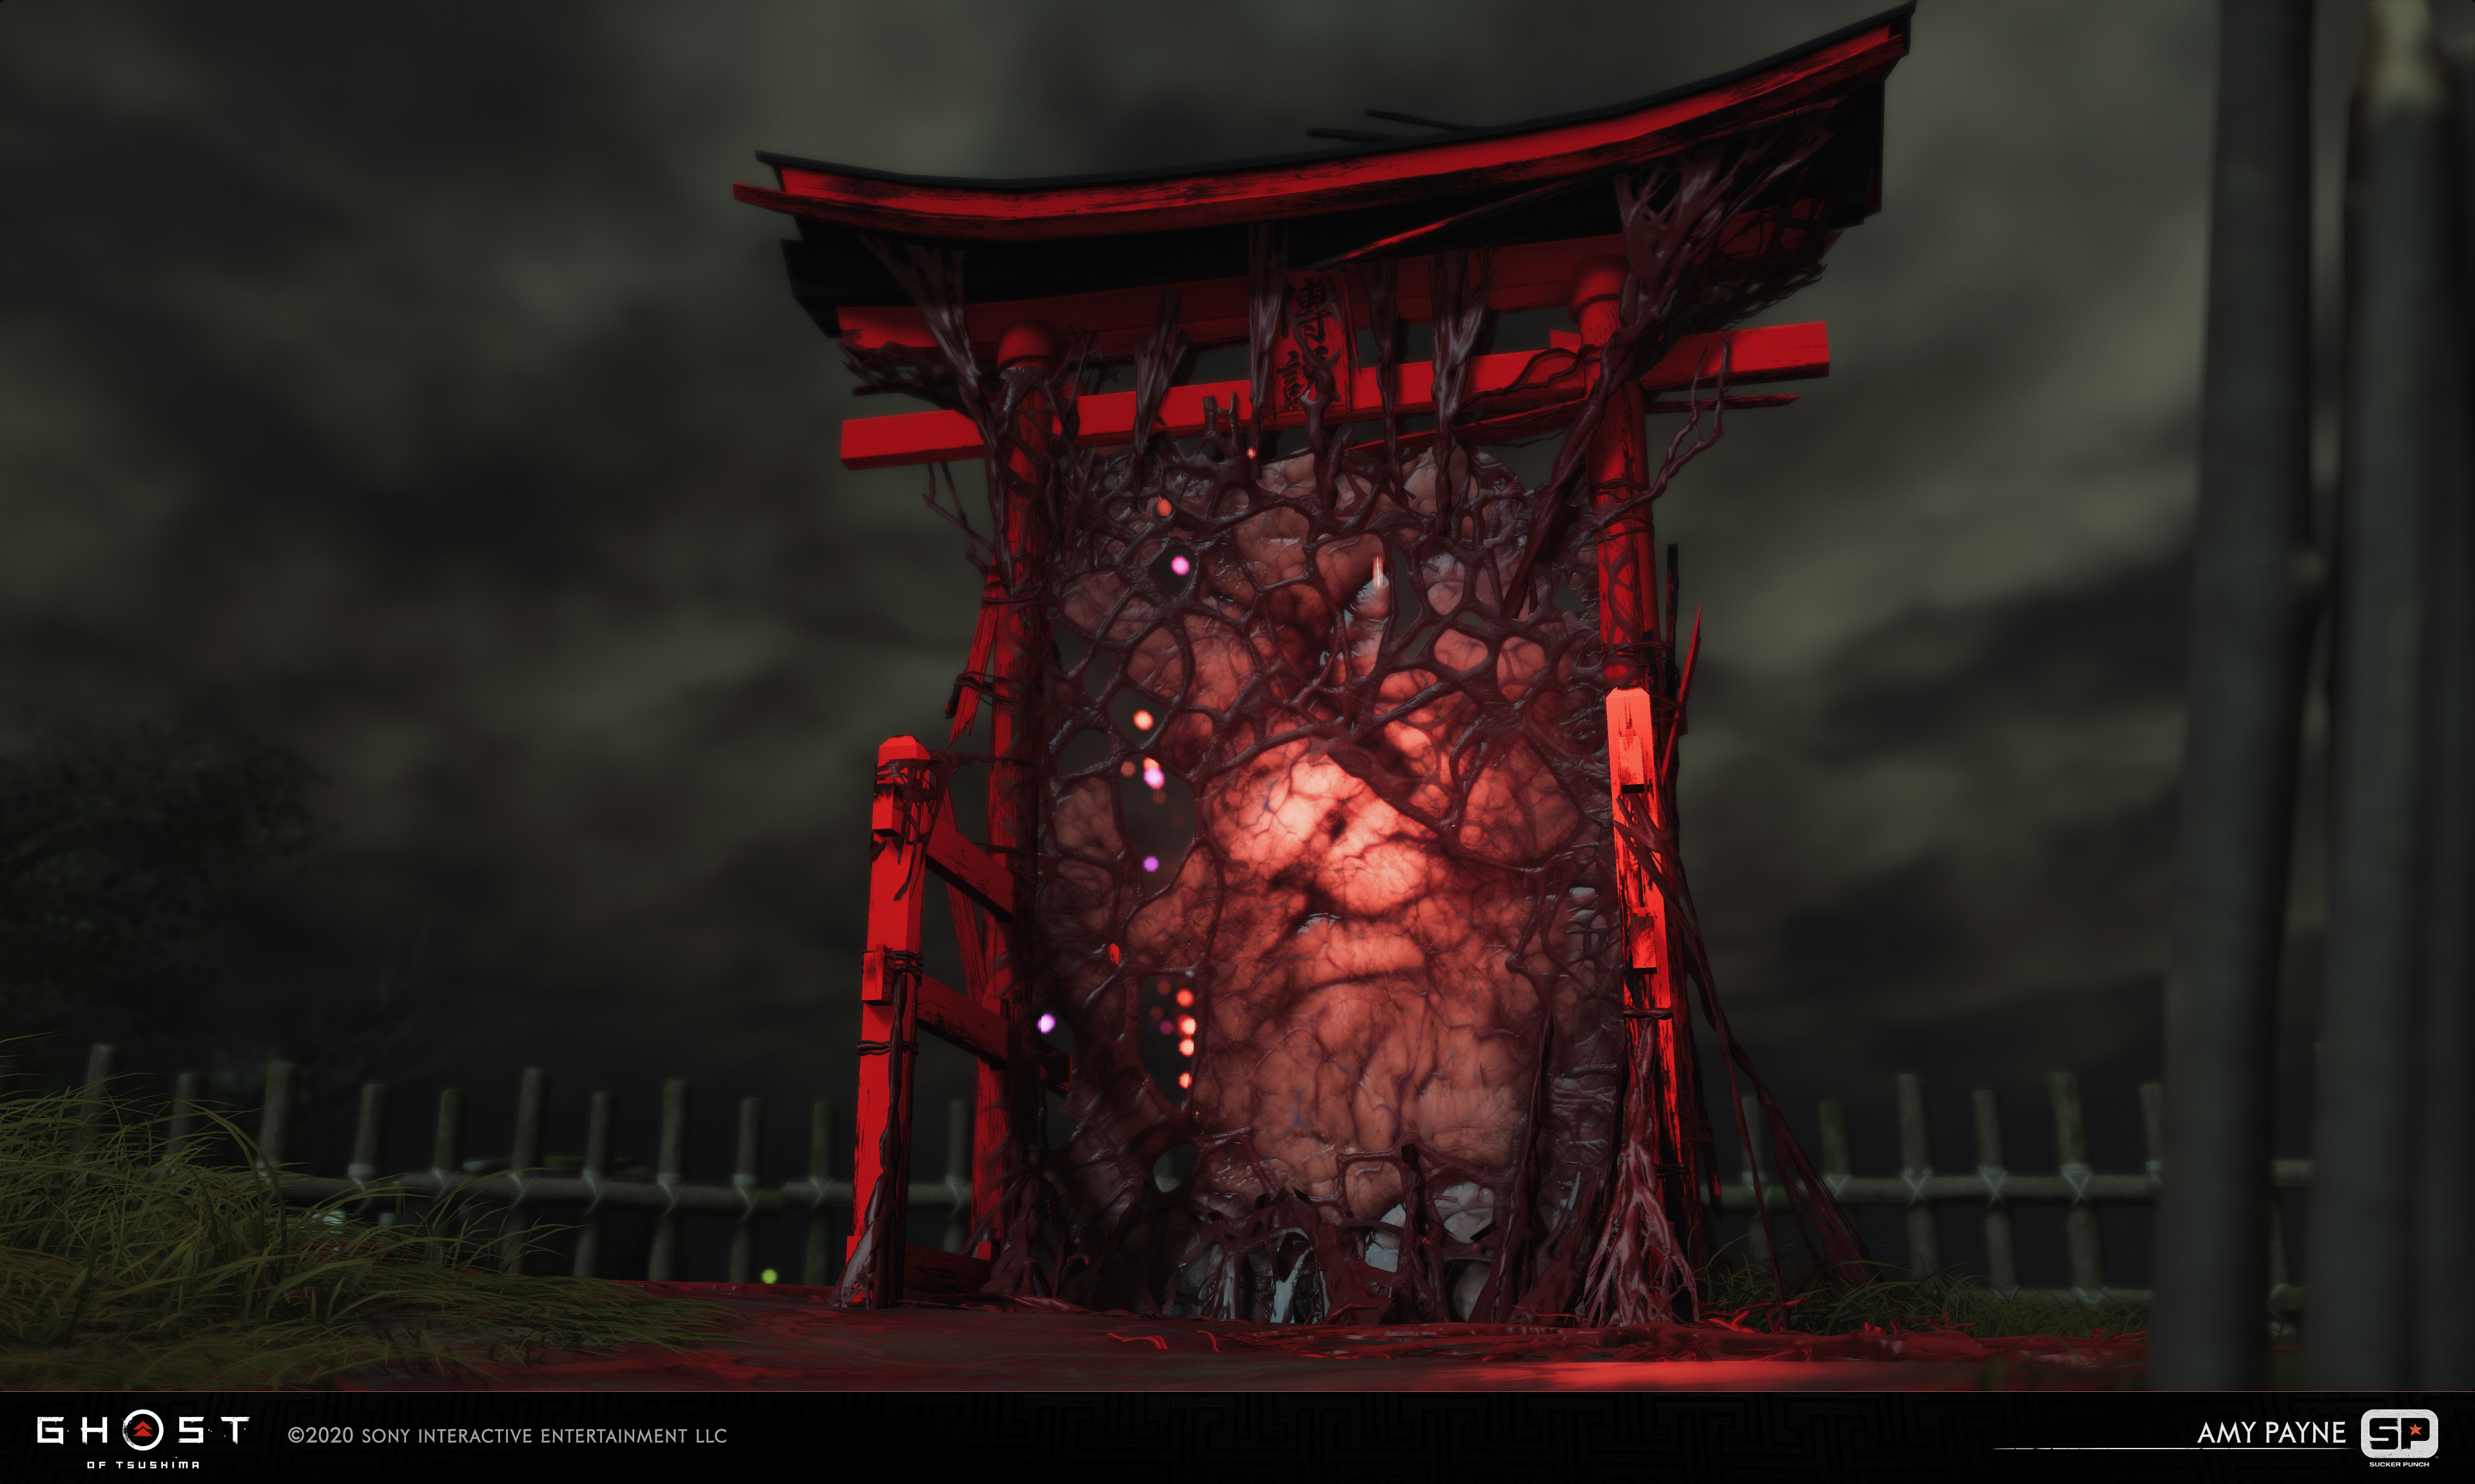 Large cursed Torii gate. Responsible for the sinew membrane material and pulsing animations.